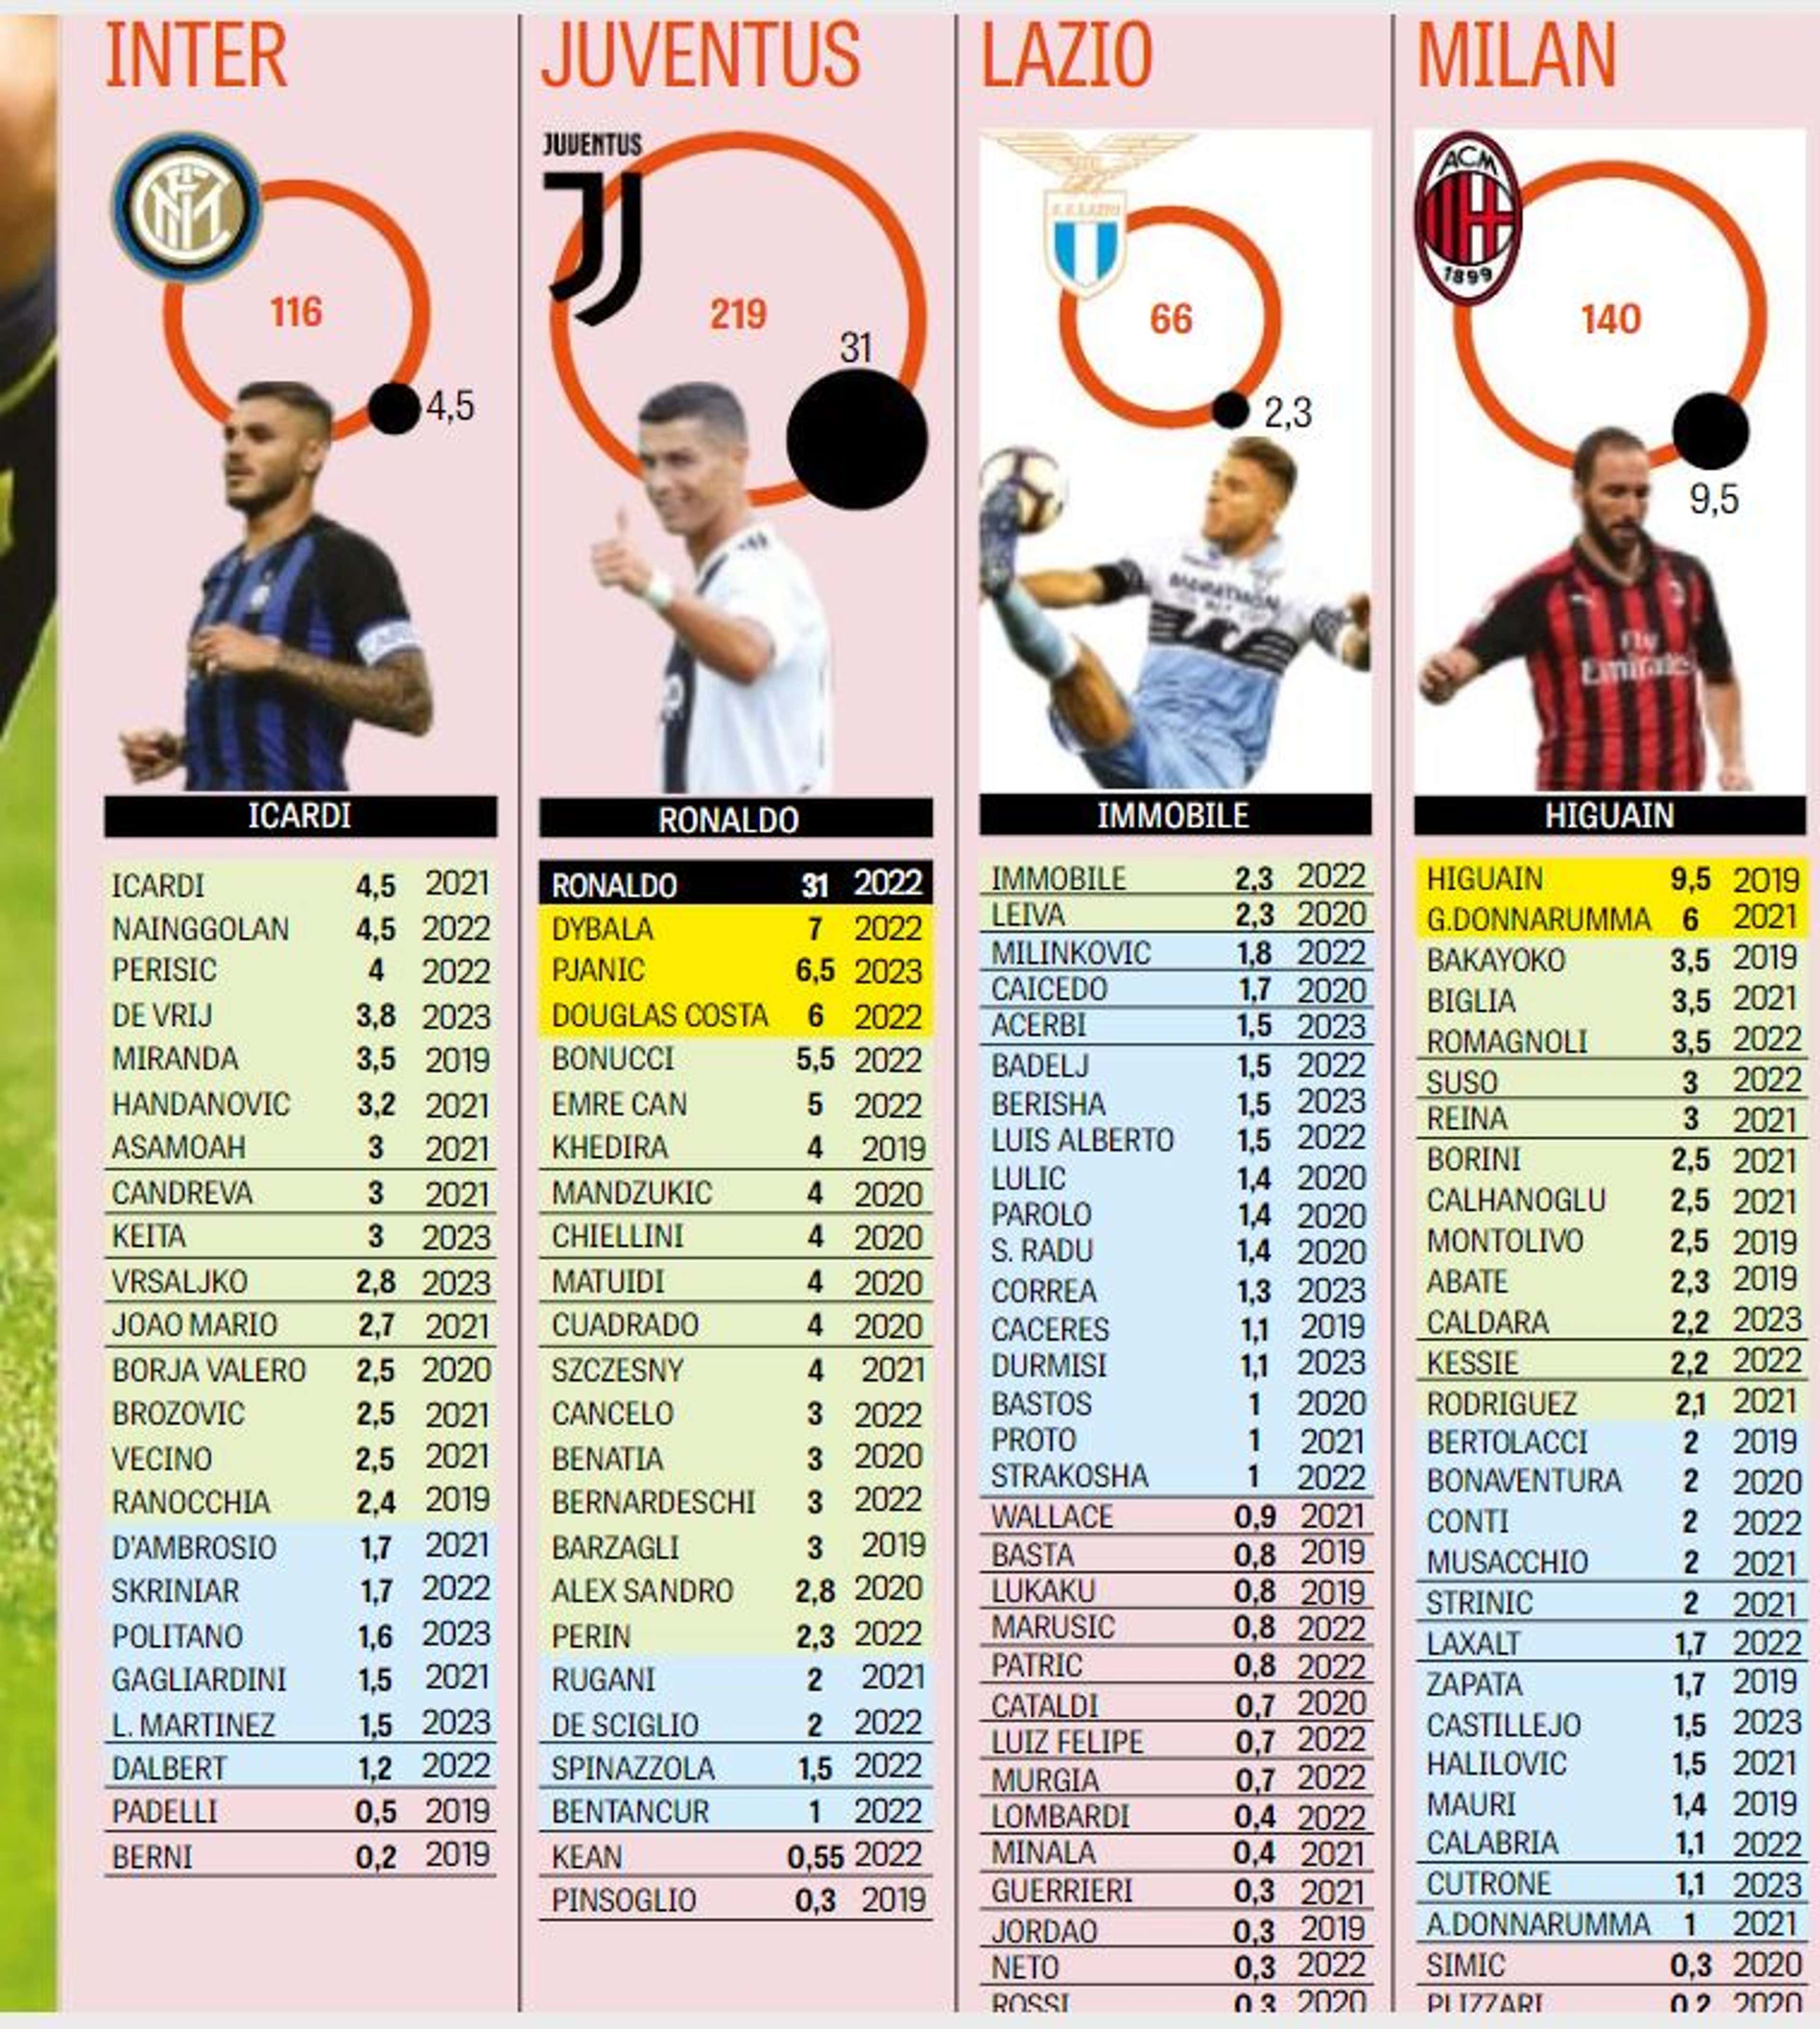 Tuttosport's list of Serie A wages